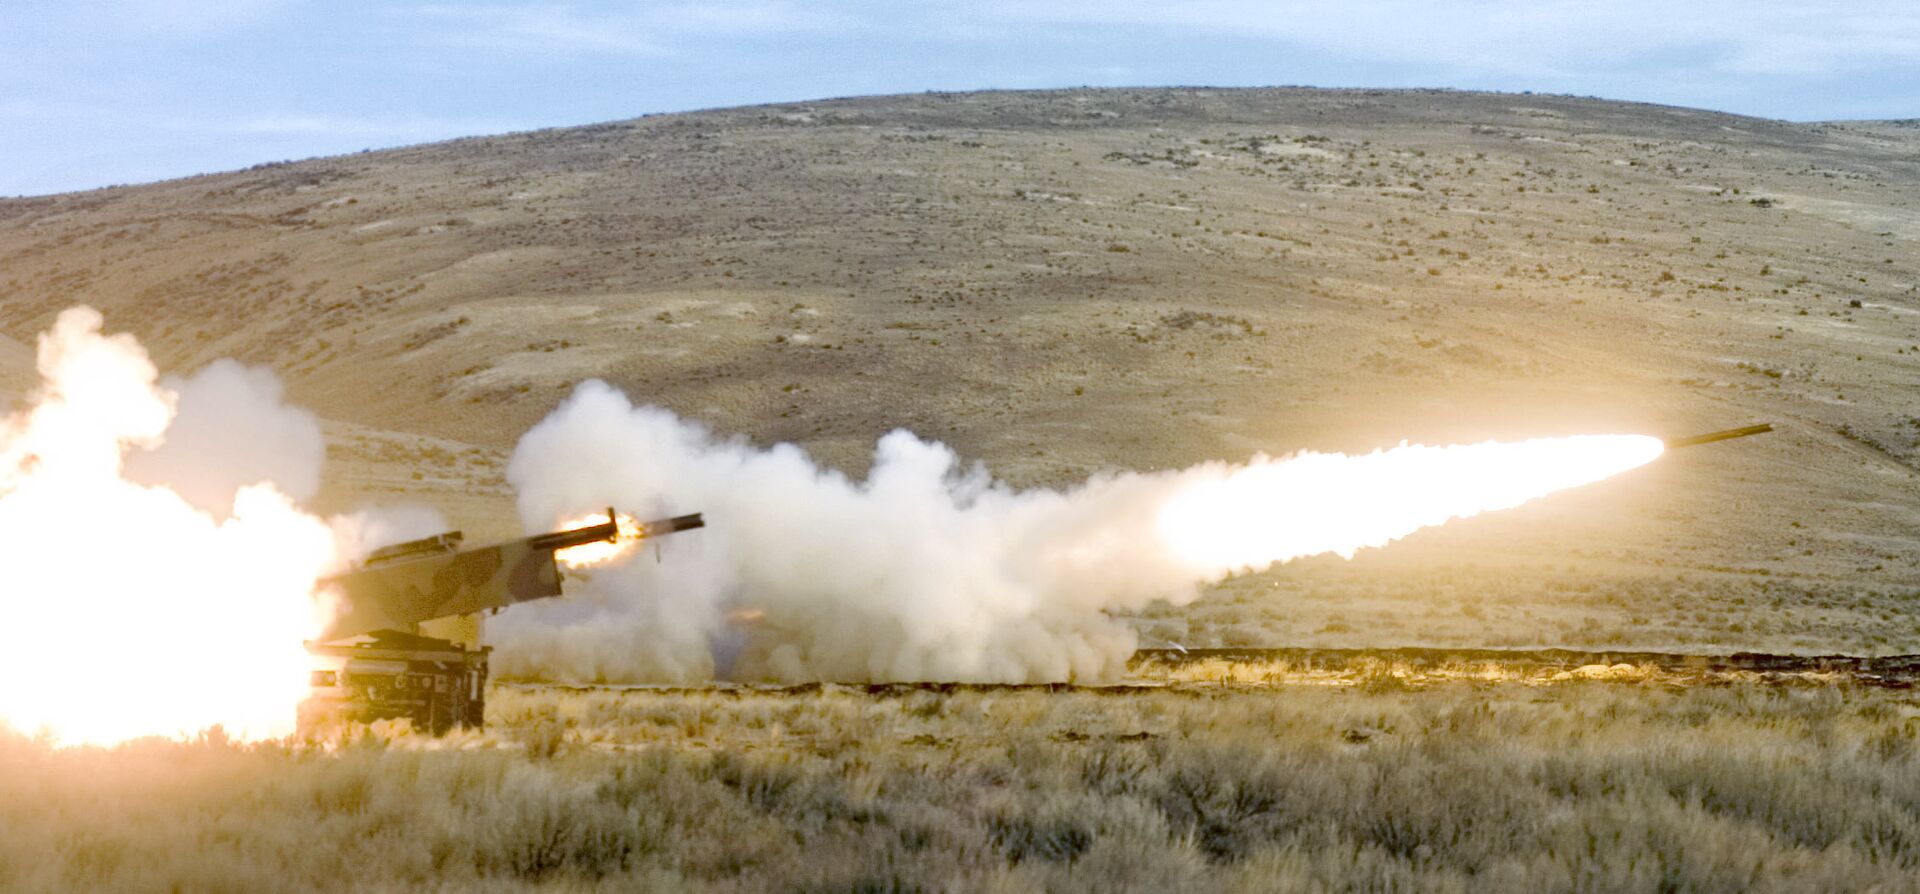 Members of the 17th Fires Brigade from Ft. Lewis fire two High Mobility Artillery Rocket System (HIMARS) rockets simultaneously in a training exercise at Yakima Training Center Nov. 1, 2007 in Yakima, Wash. - Sputnik International, 1920, 01.06.2022